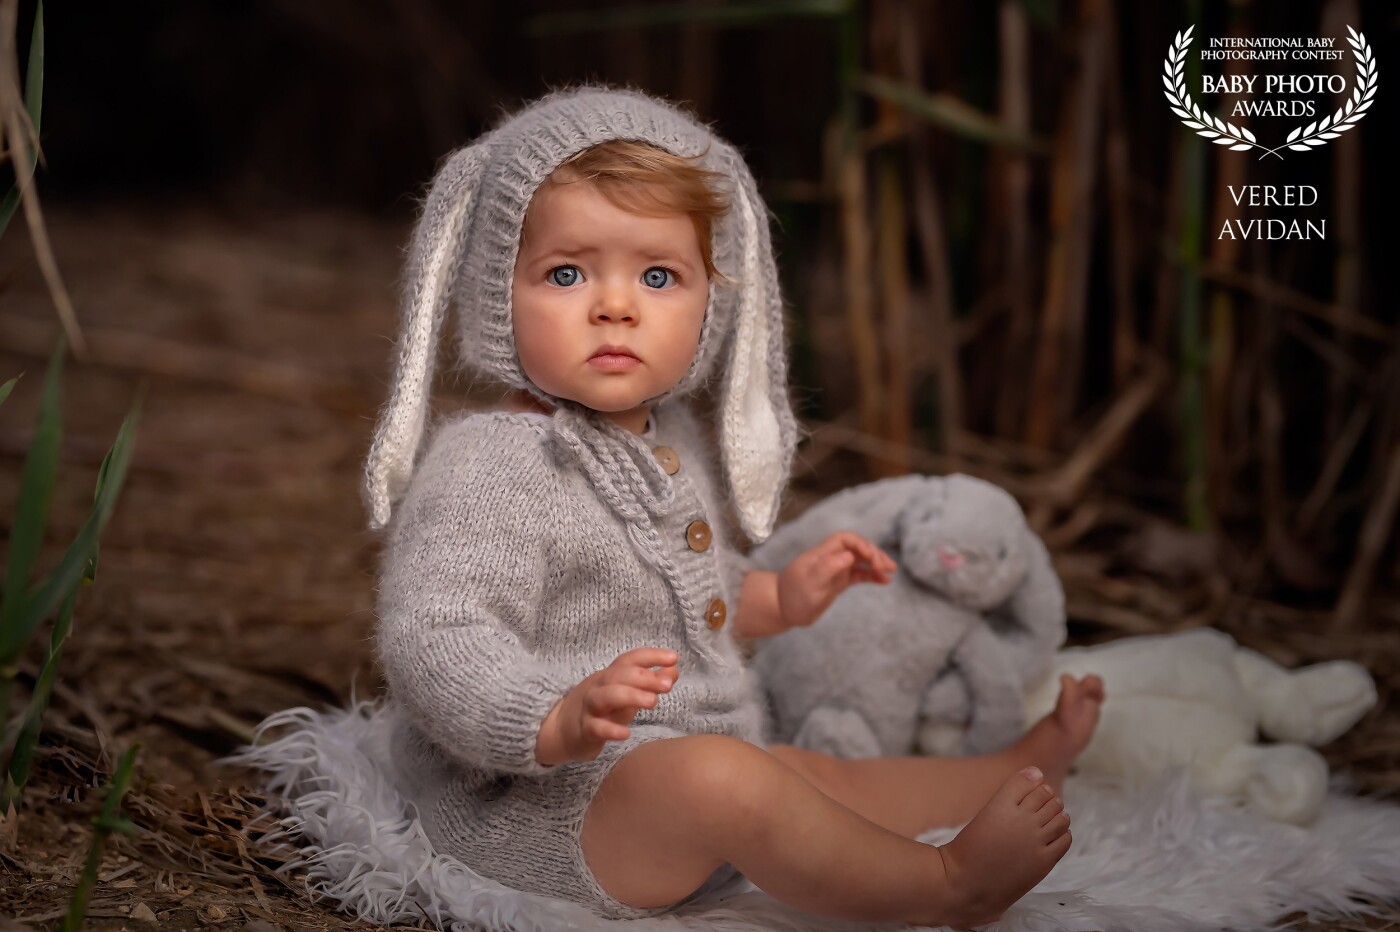 Baby Ariya celebrating her first birthday in a nature session. She is so beautiful, I could not take my eyes off her. In the picture her bunny session.